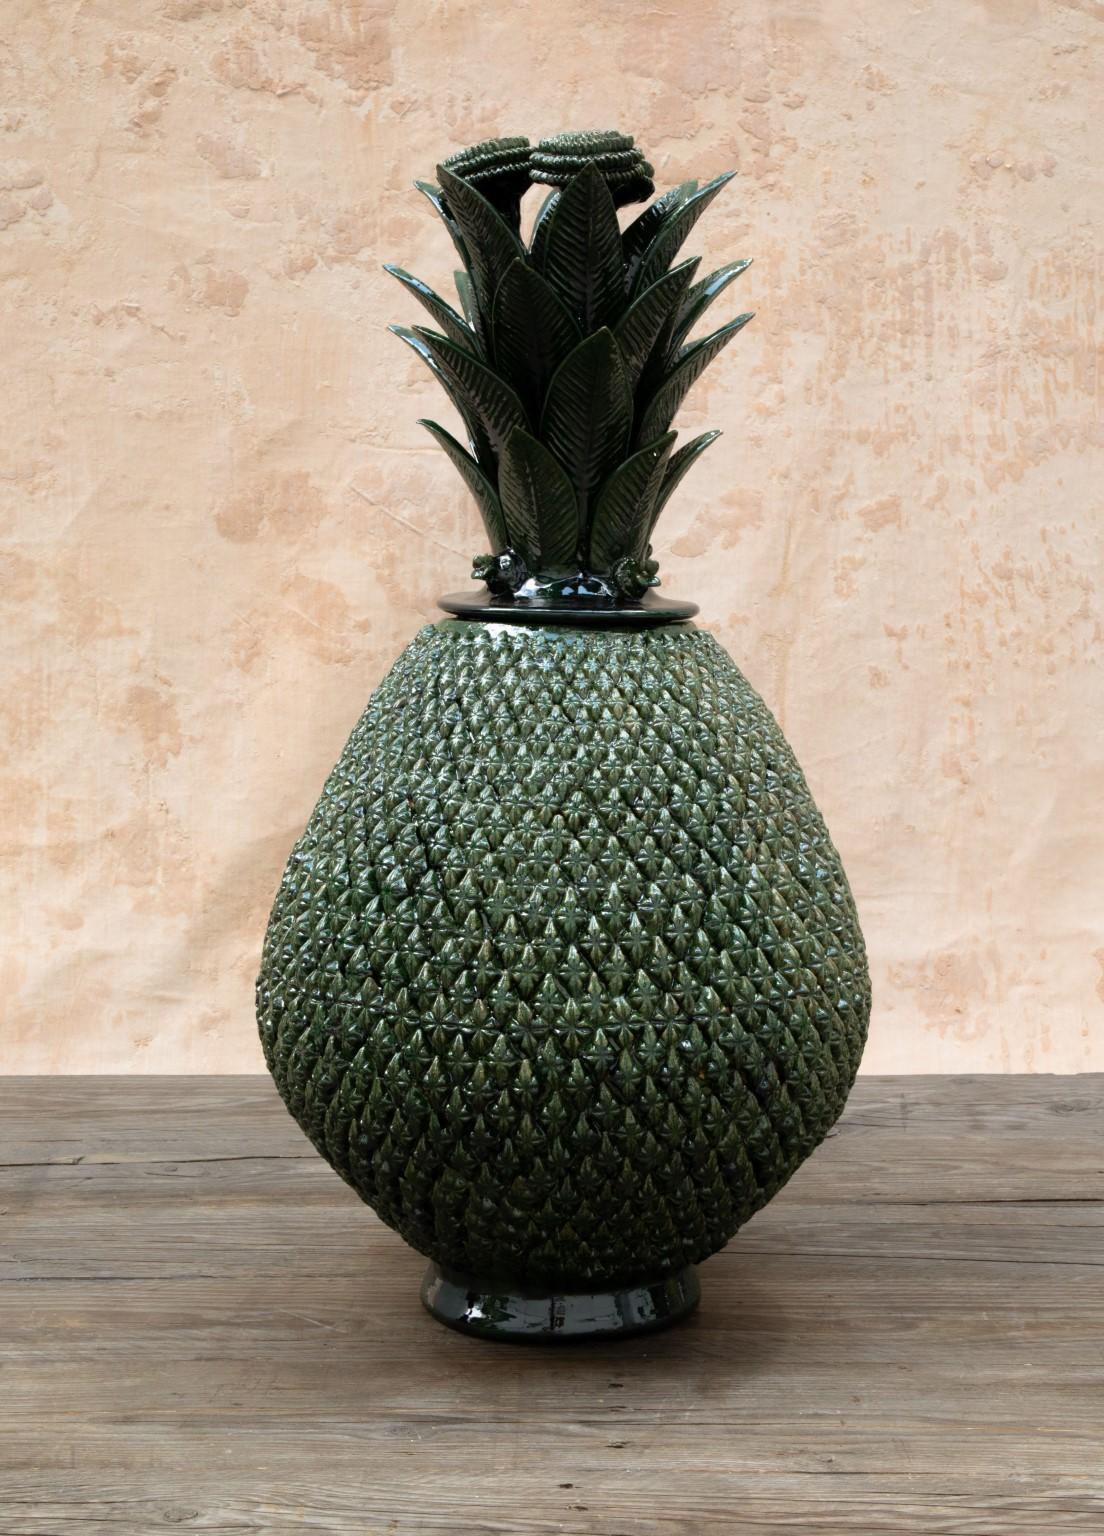 Piña Michoacana by Onora
Dimensions: W 24 x H 49 cm
Materials: clay, glazed pottery

Hand sculpted clay, covered with a mineral based slip and burnished using a quartz stone. The “Circo Collection” is a reproduction of Herón Martínez Mendoza's